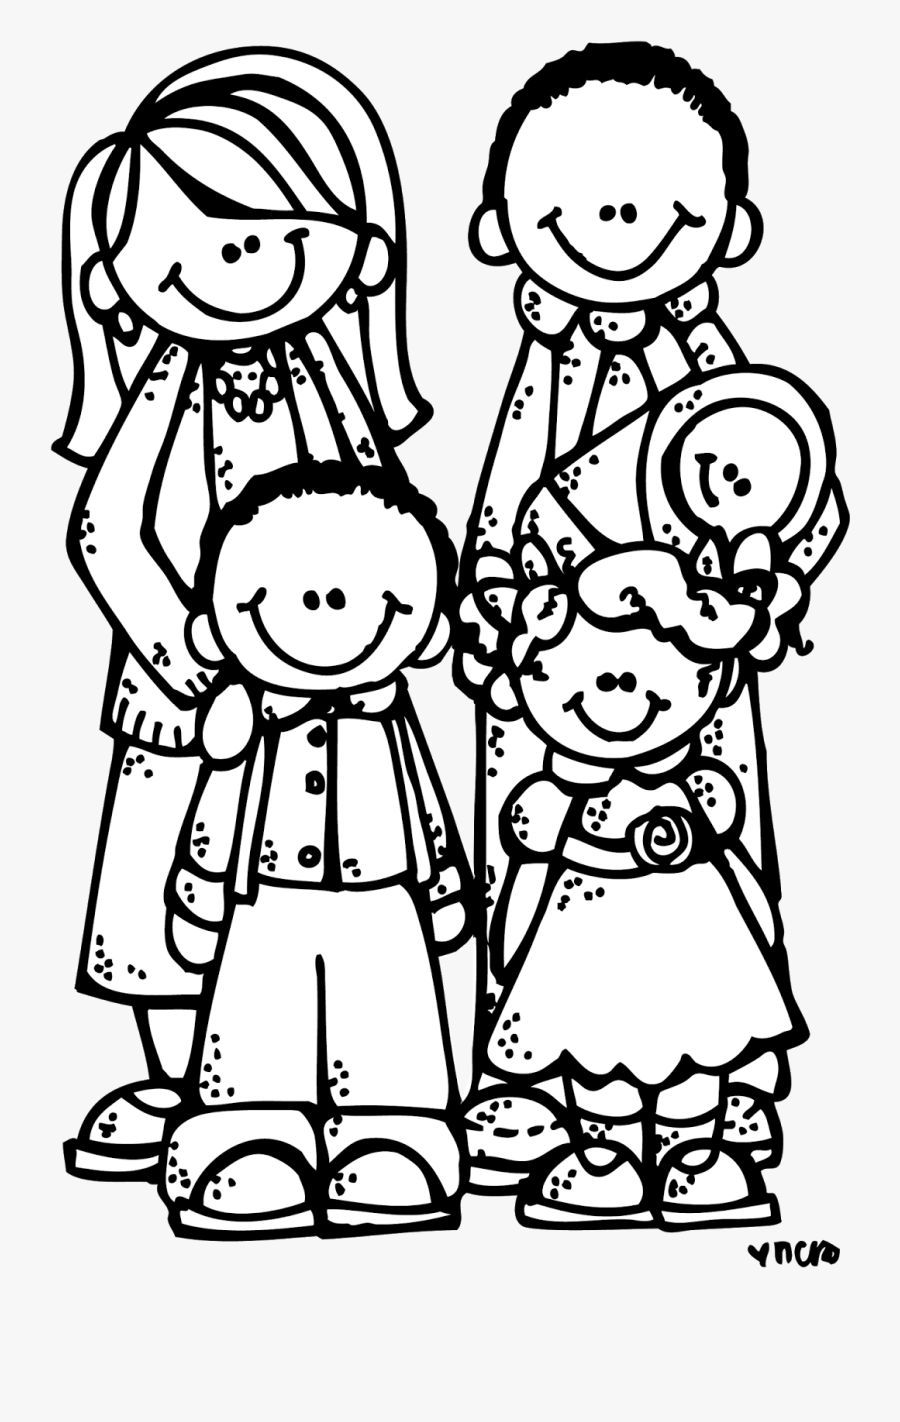 Family Black And White Family Clipart Black And White - Family Clipart Black And White, Transparent Clipart